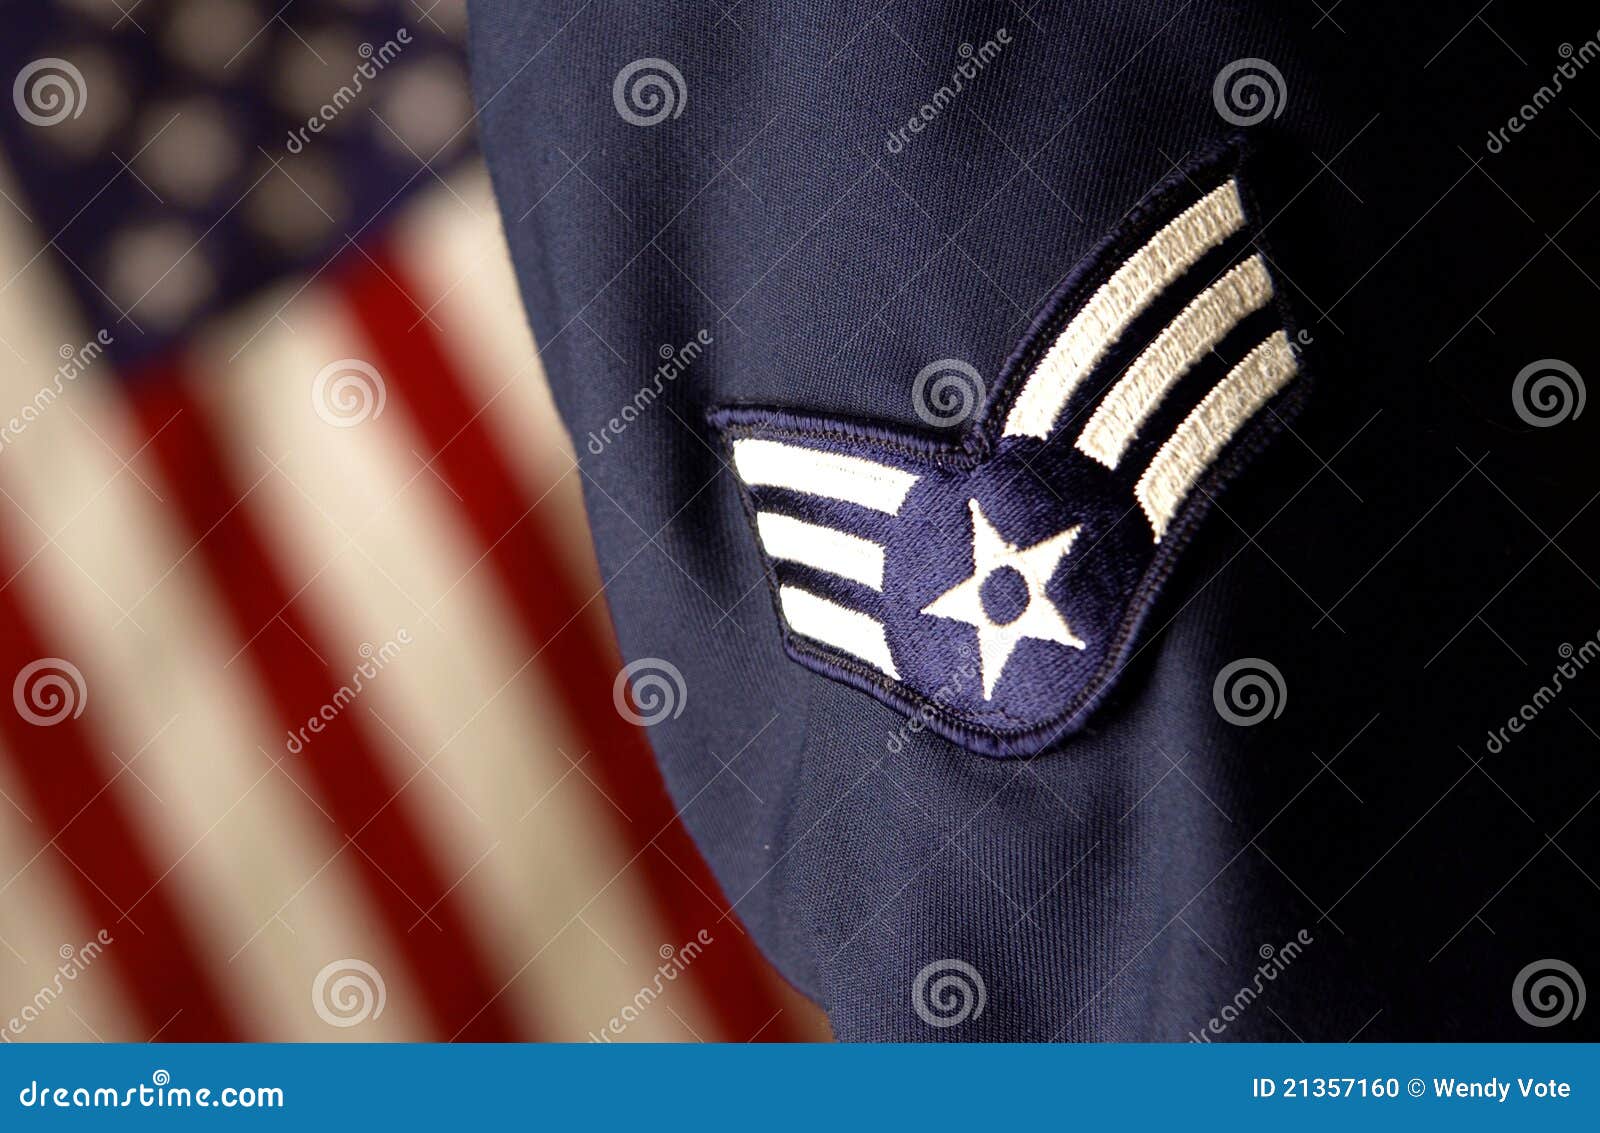 united states of america armed forces